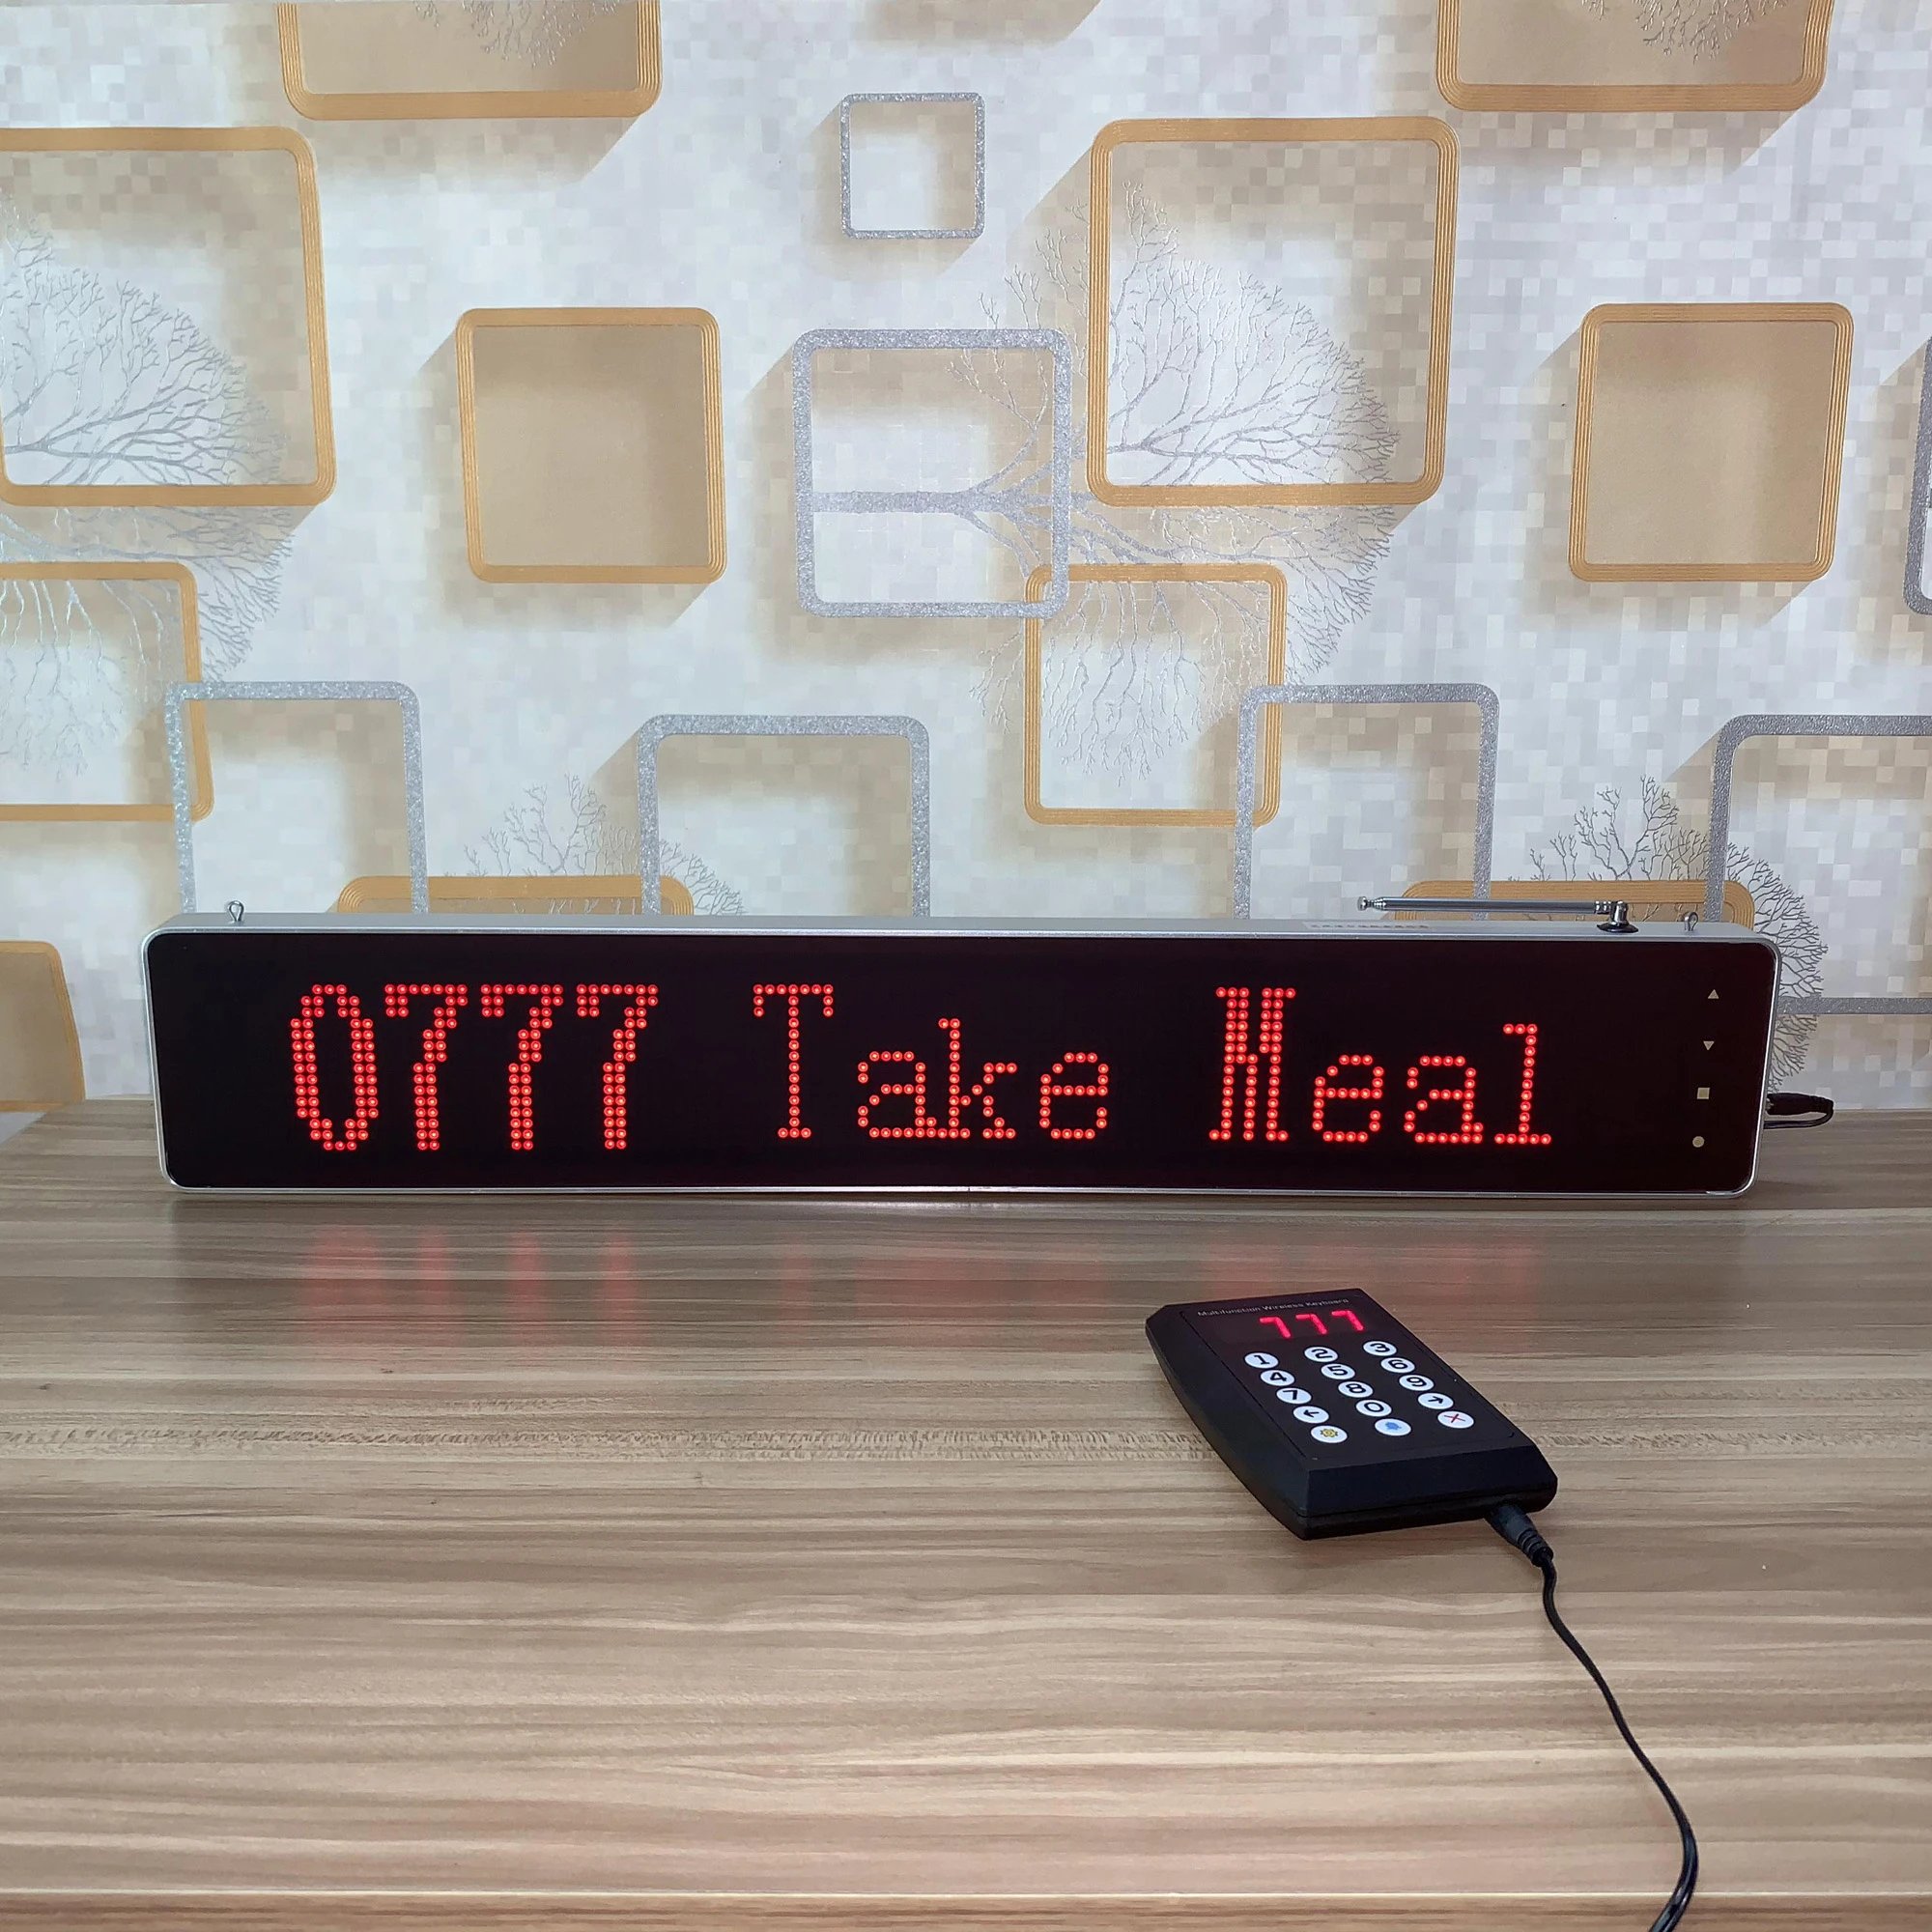 wireless calling system restaurant pager with LED display panel queue management device